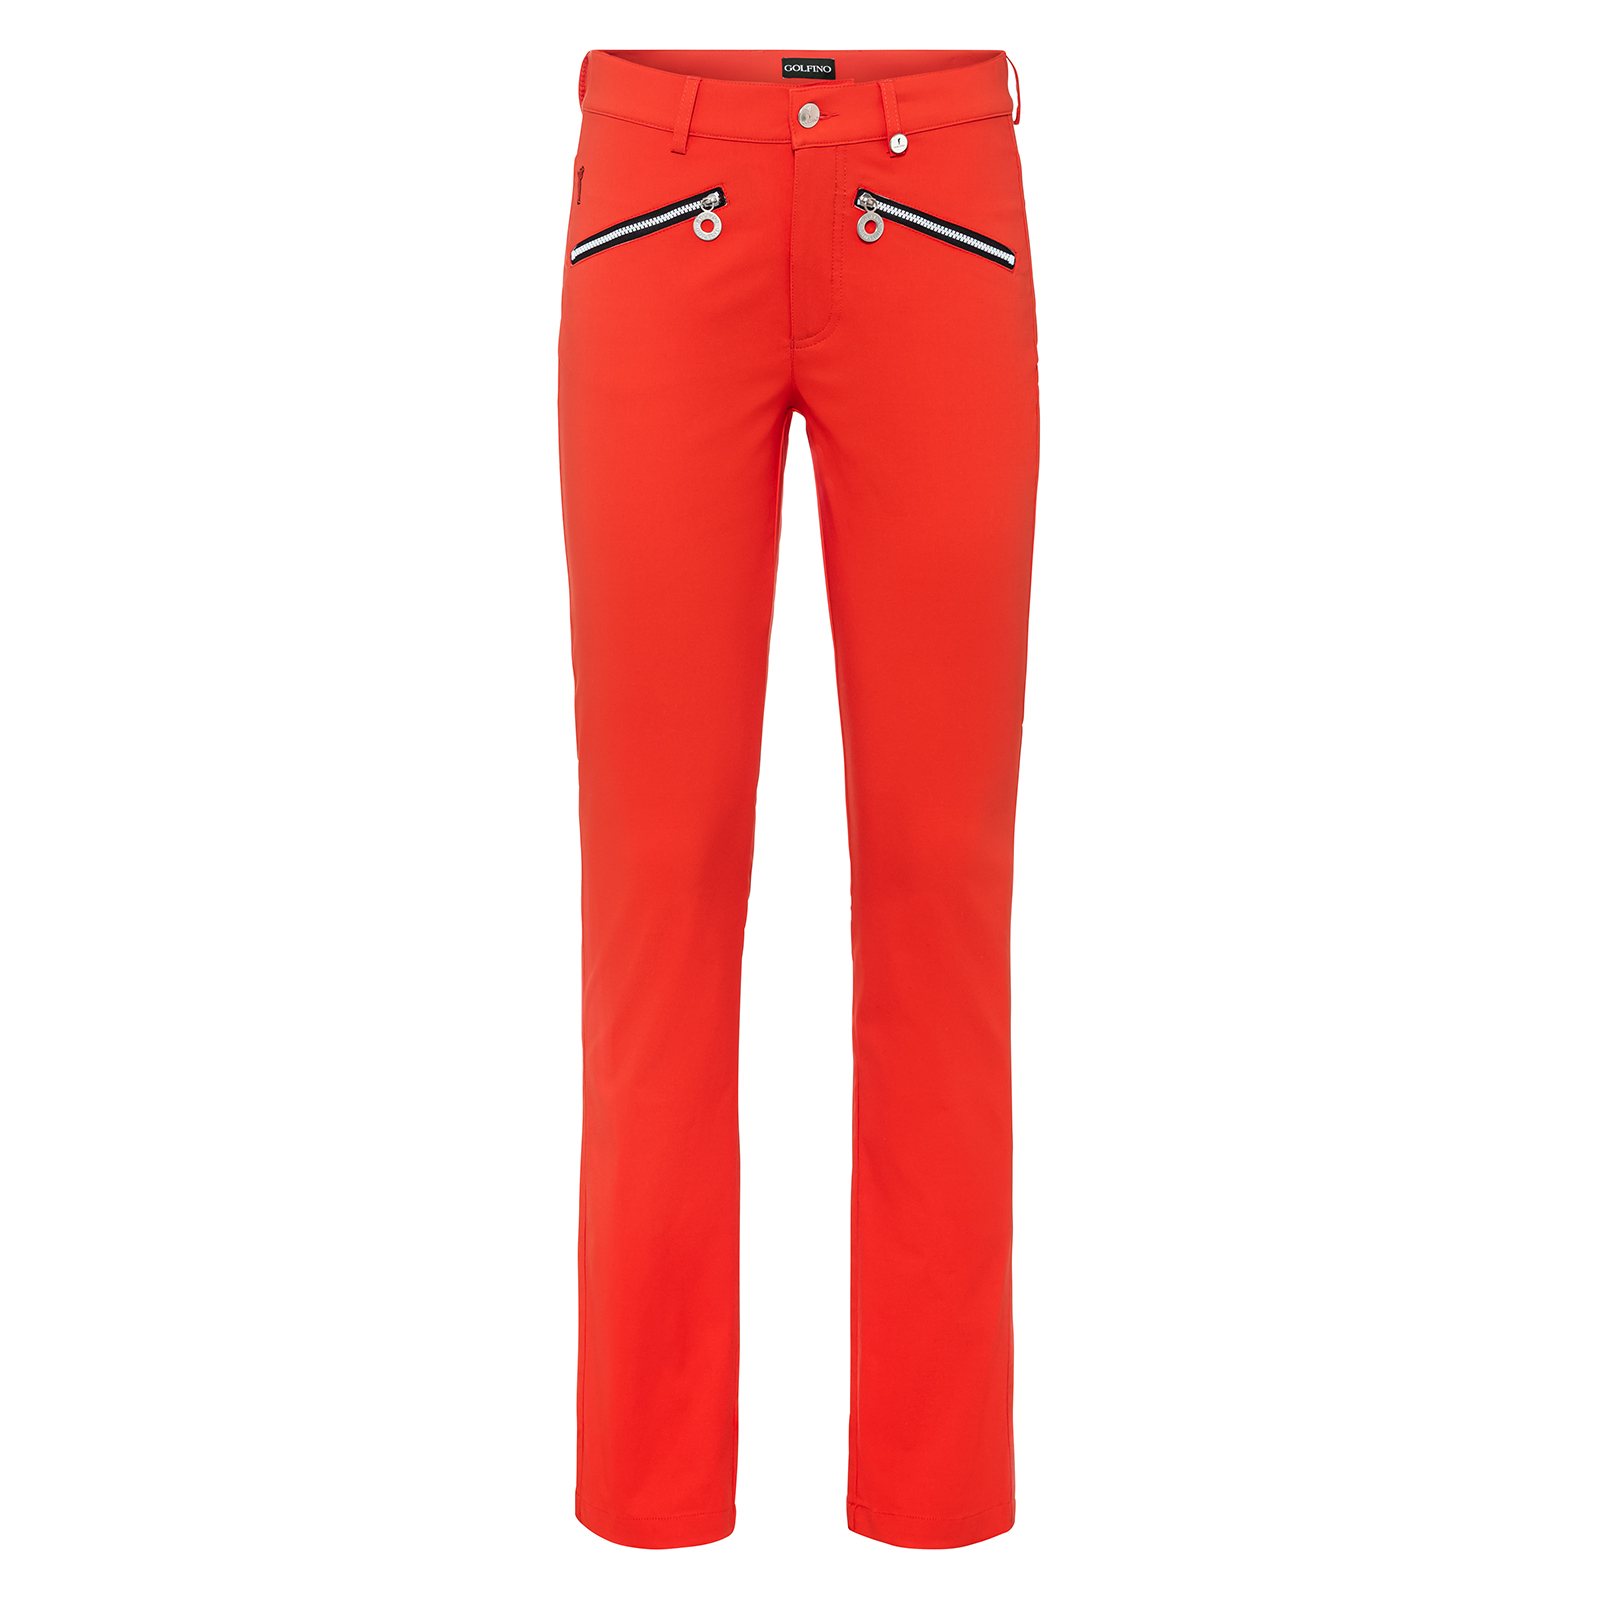 Ladies' stylish golf trousers in warm thermal stretch